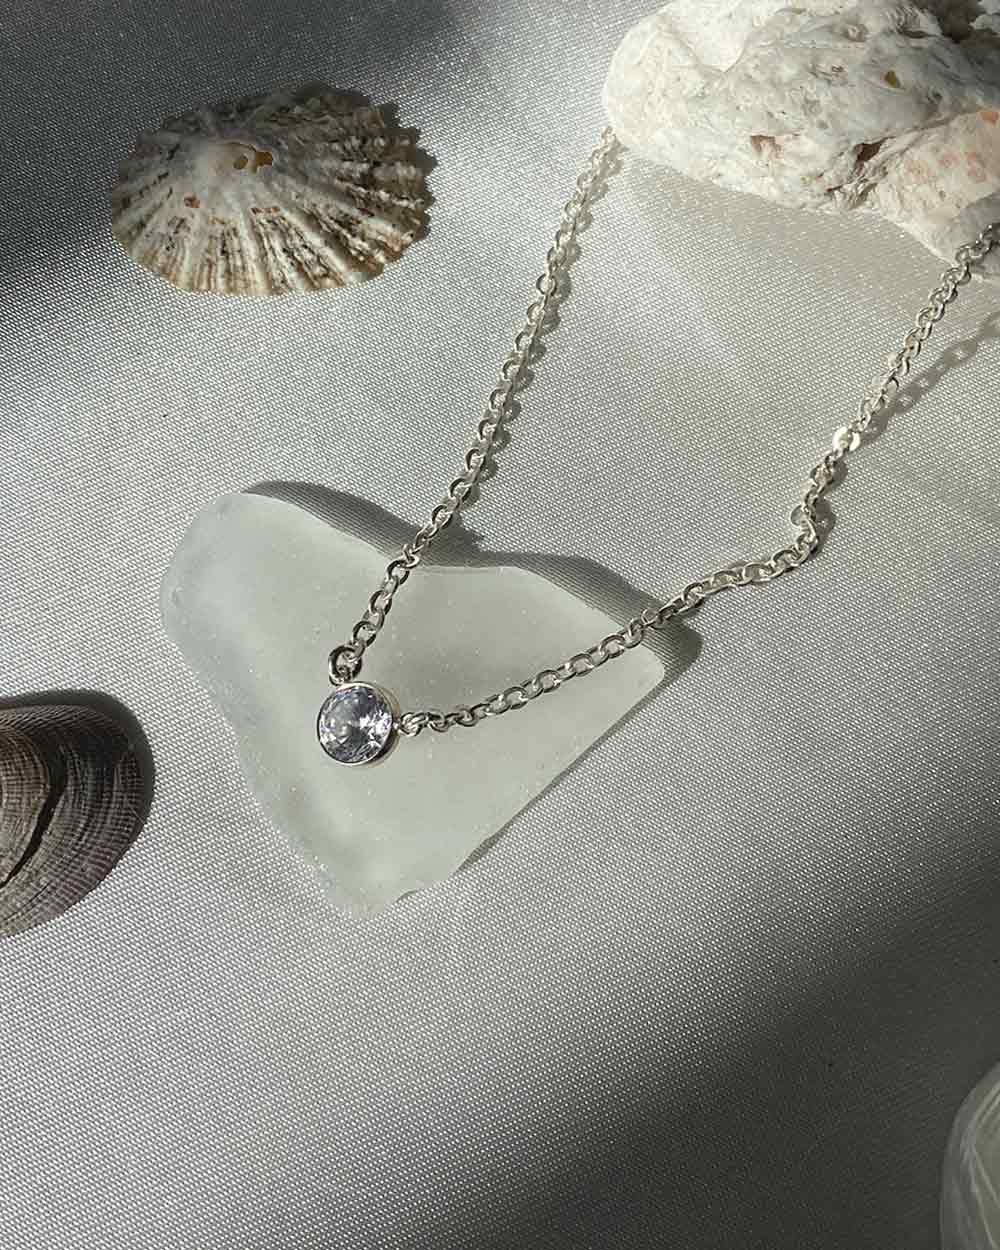 Purity Tiny Crystal Necklace